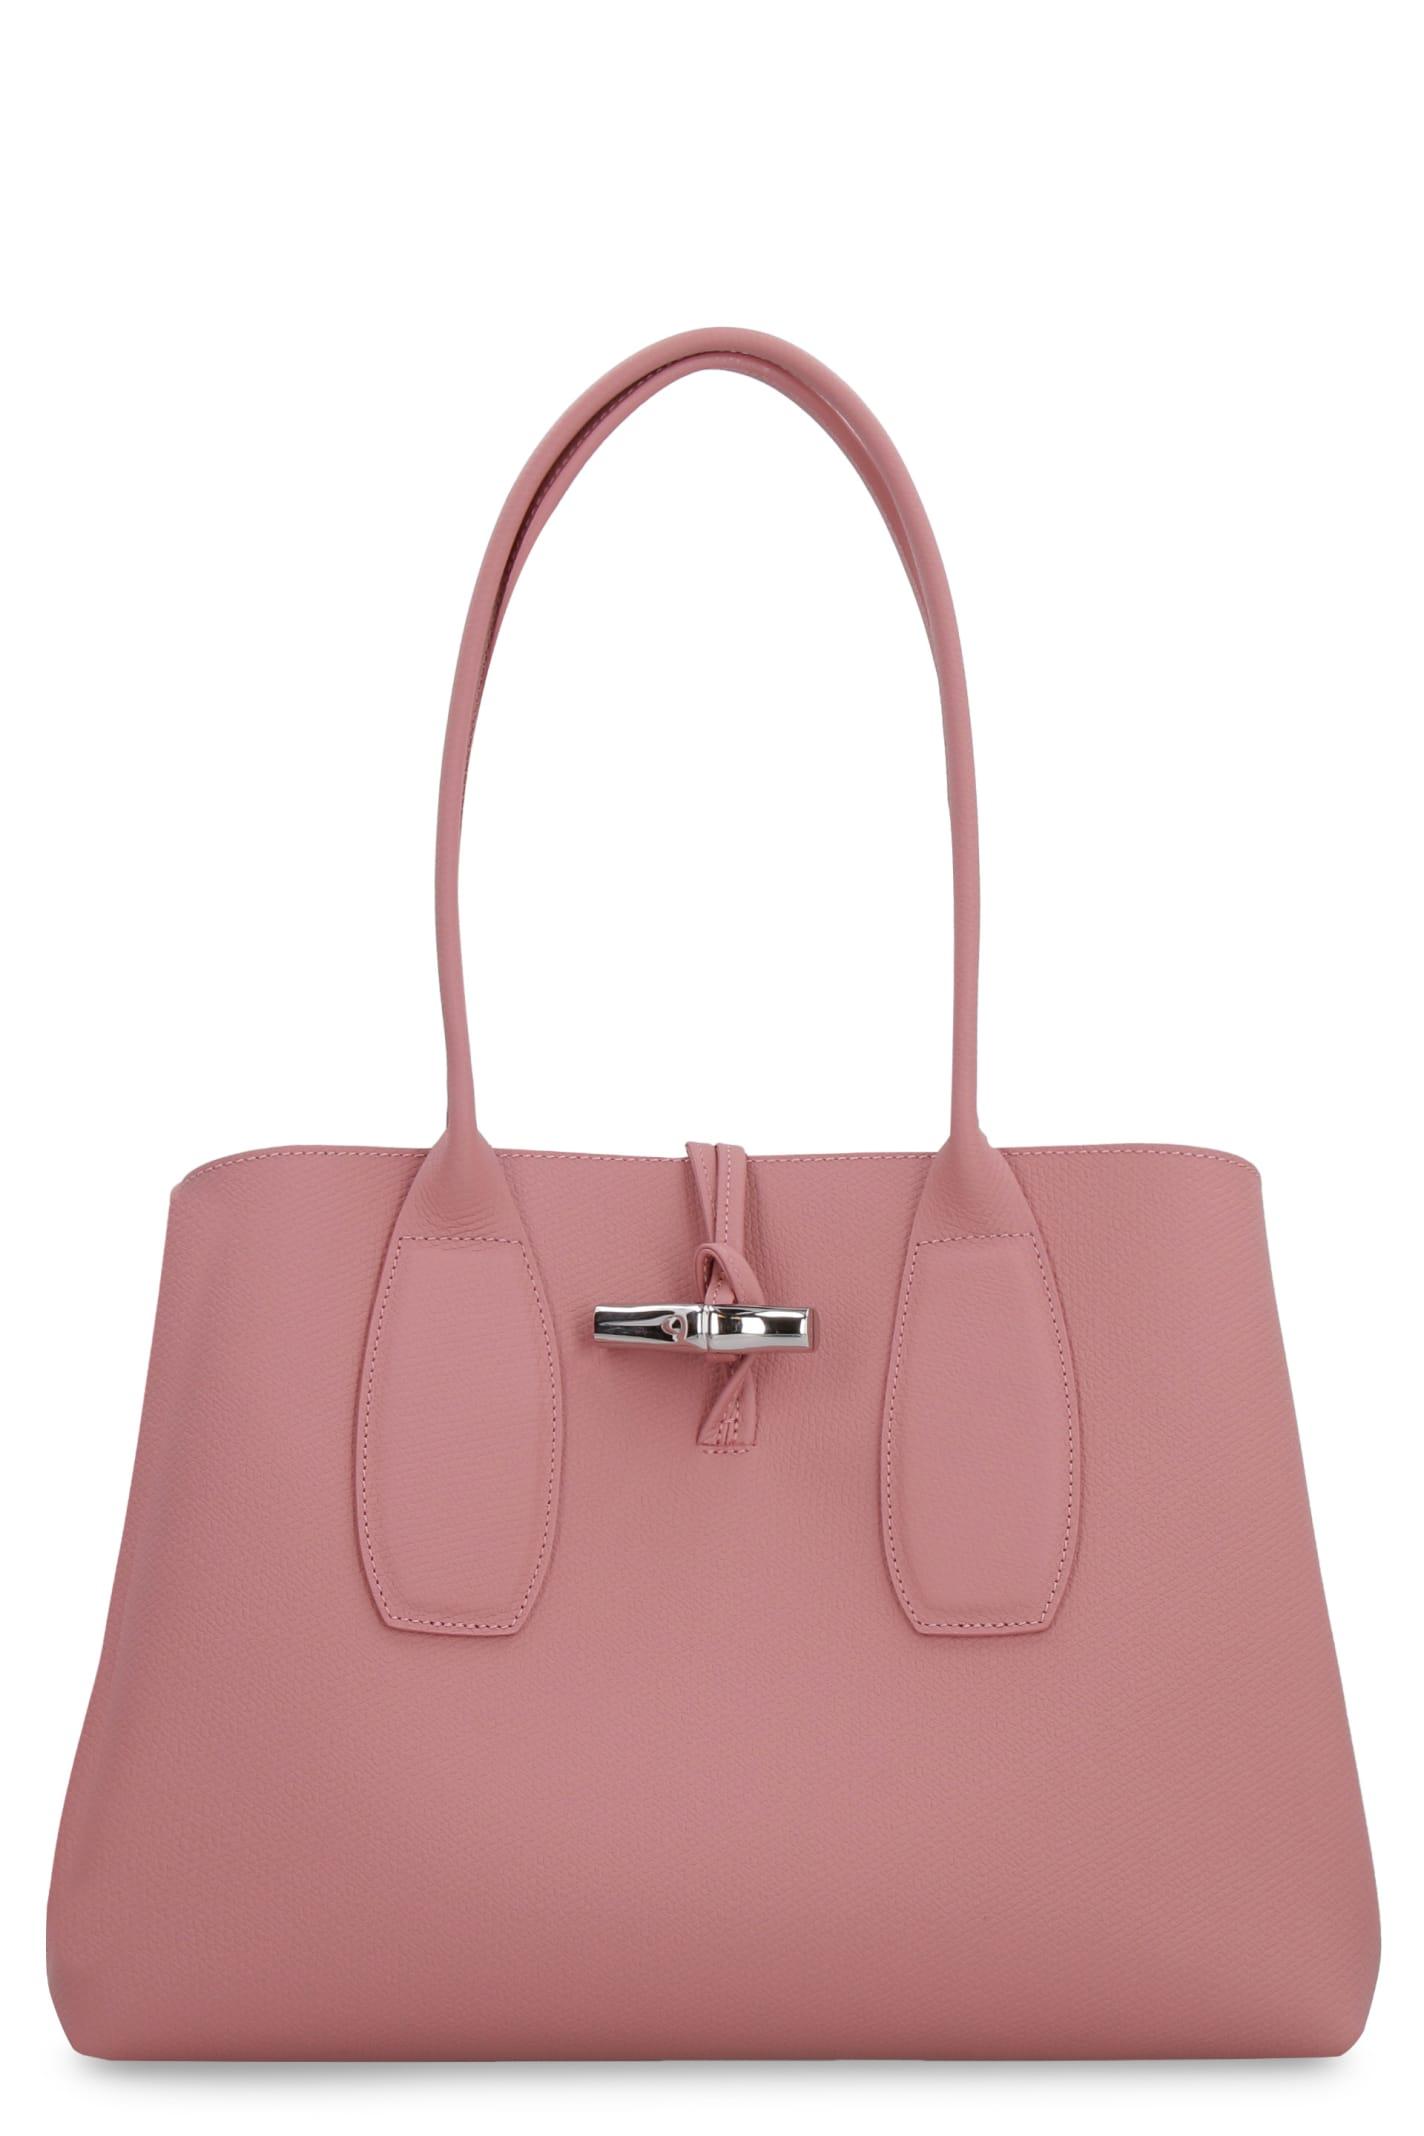 Longchamp Roseau Leather Tote in Pink | Lyst